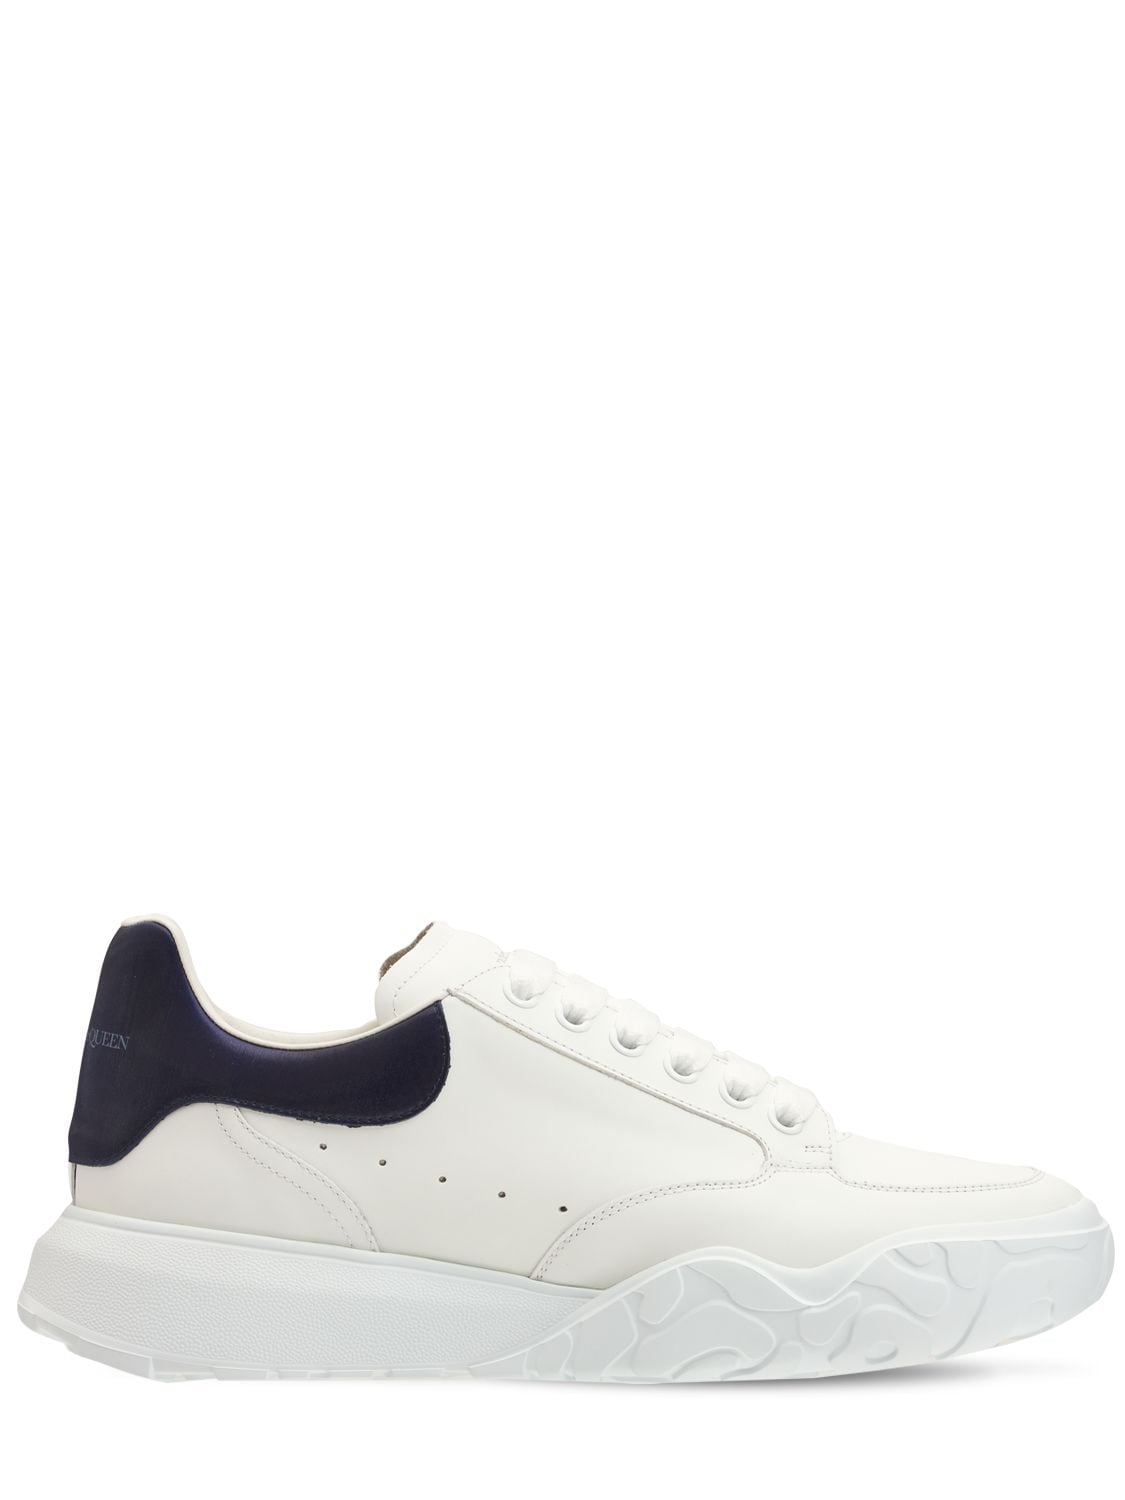 ALEXANDER MCQUEEN Leather Lace-up Sneakers